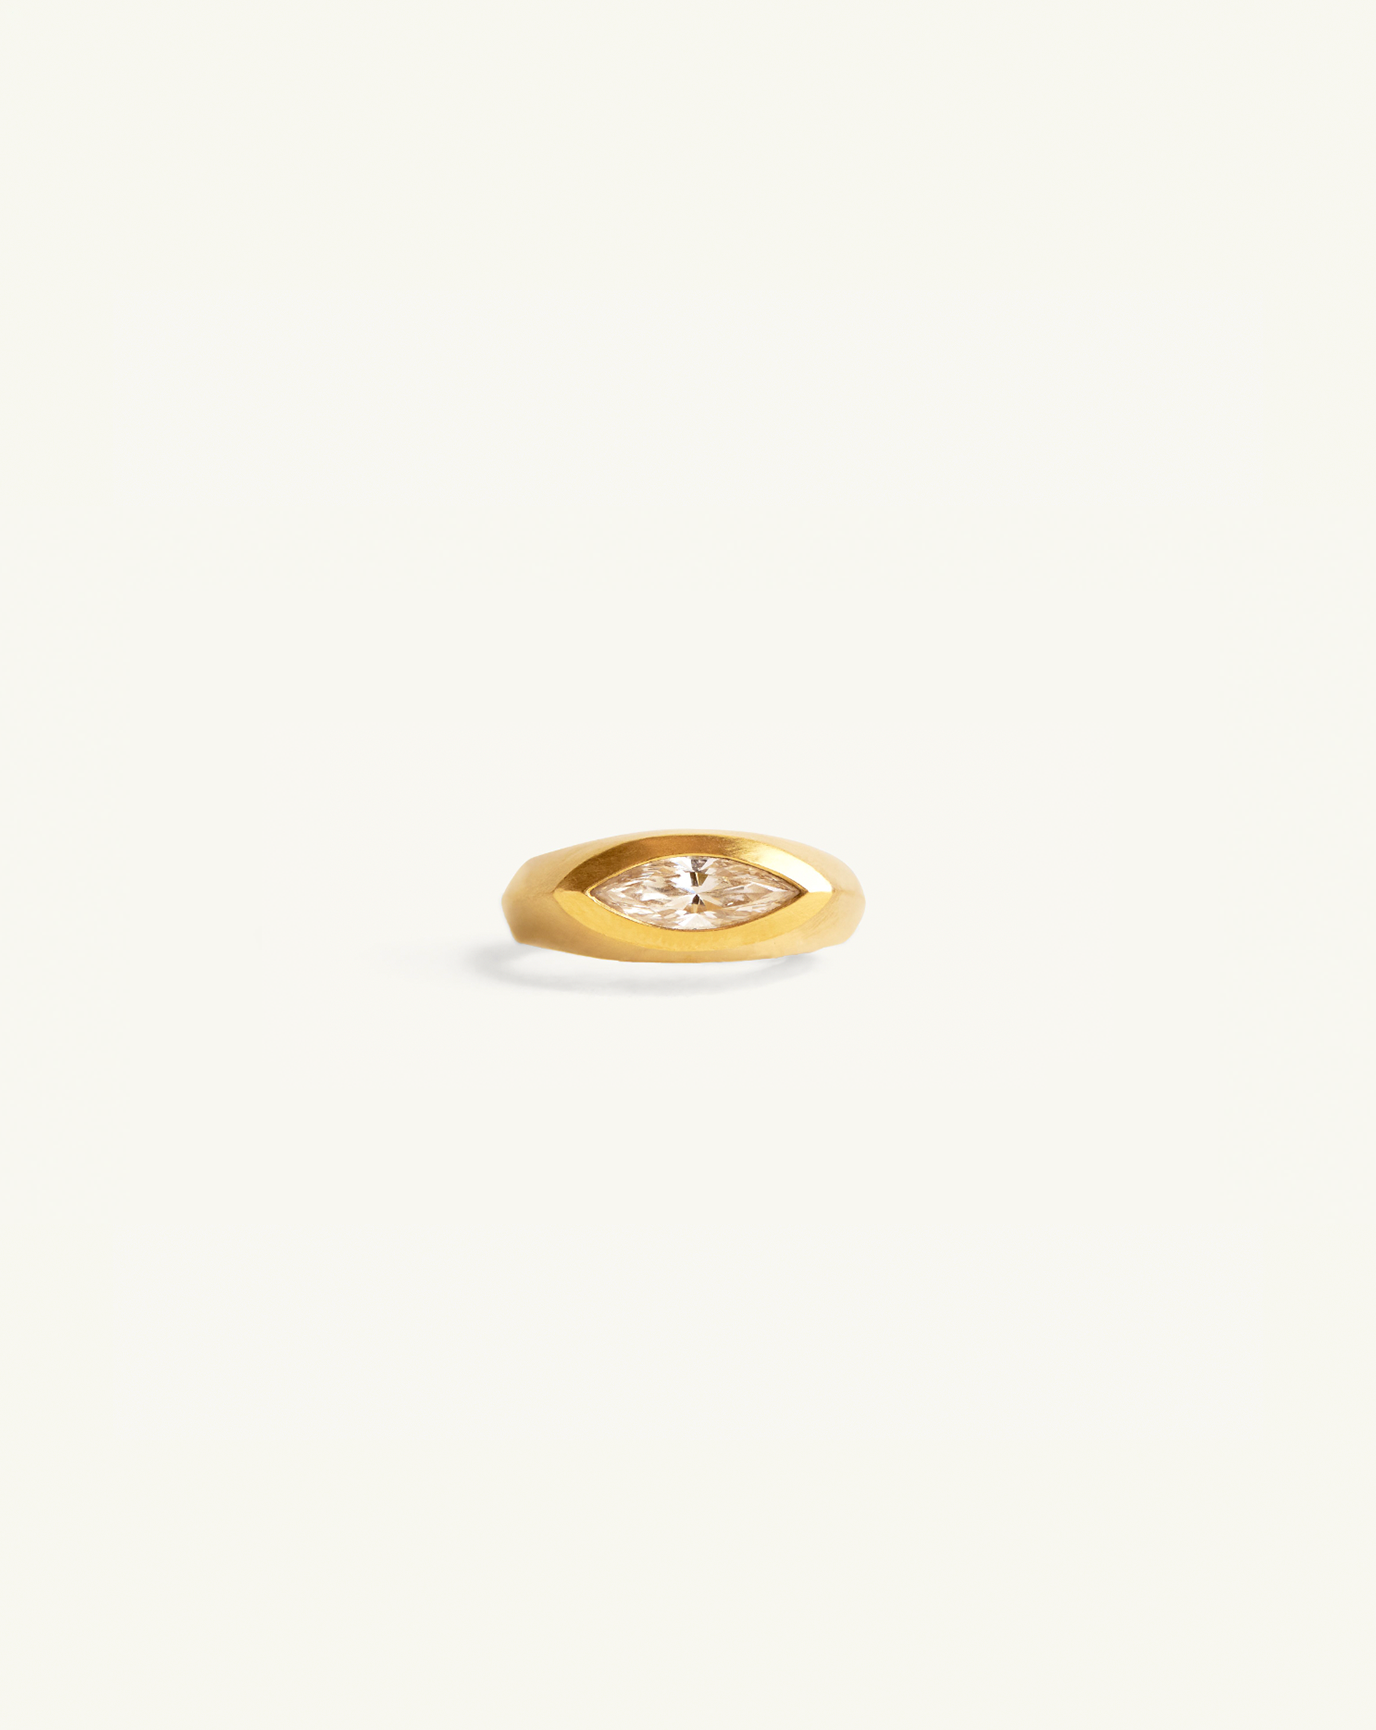 Product image of the i seira sculptural ring with diamond